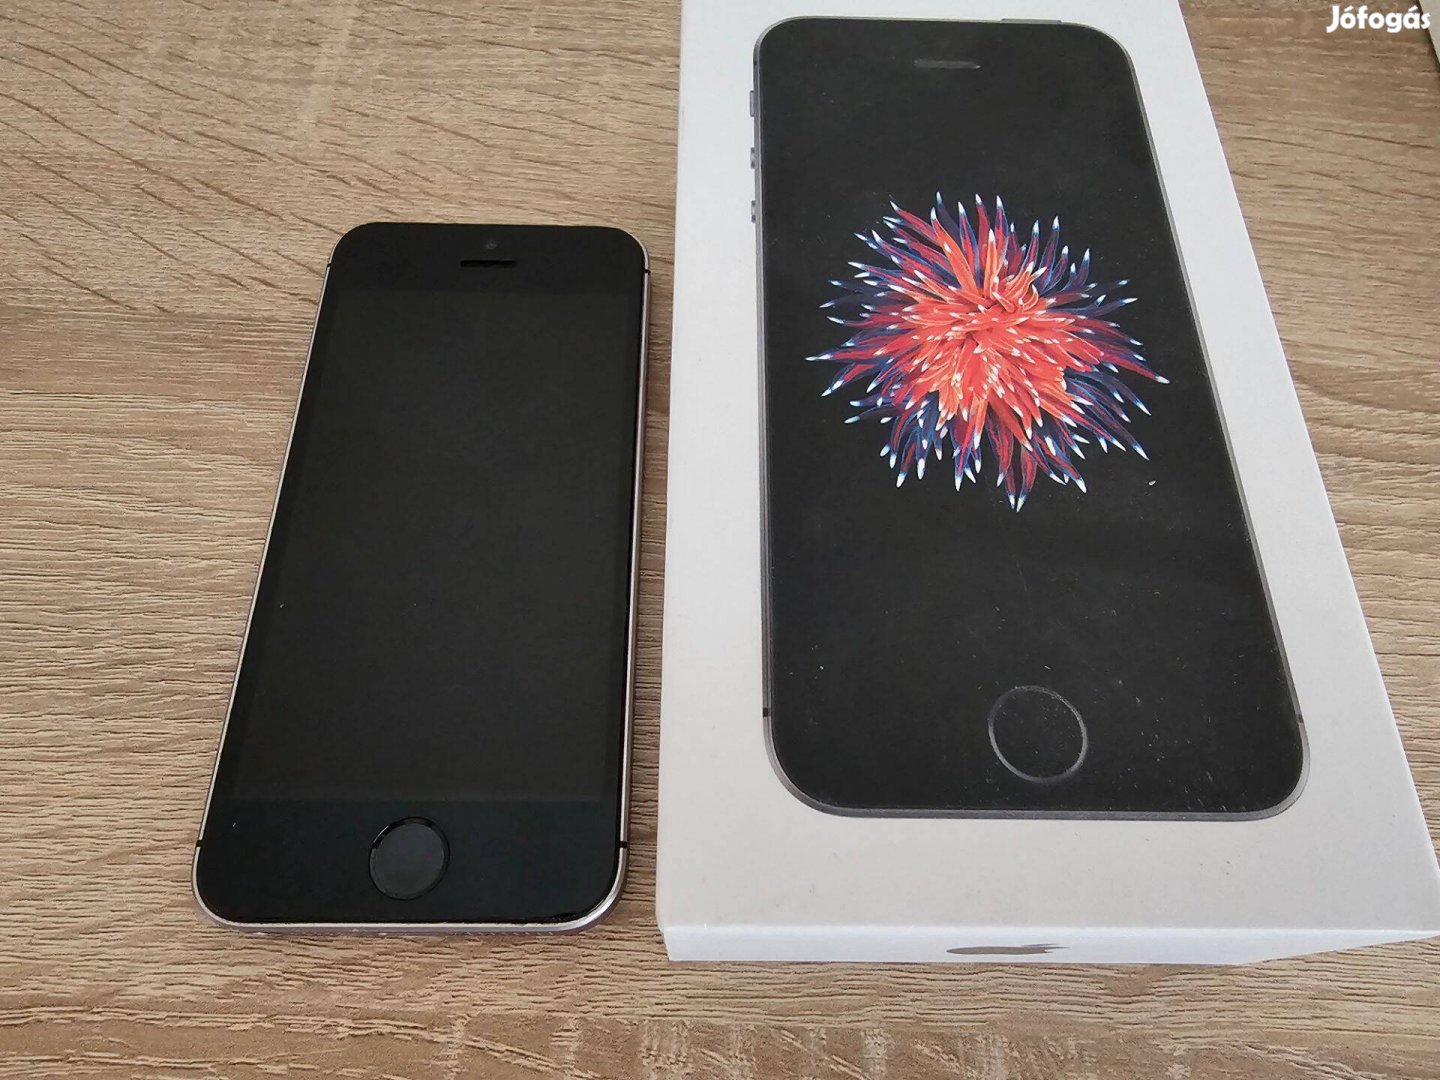 Iphone SE 16 GB space gray